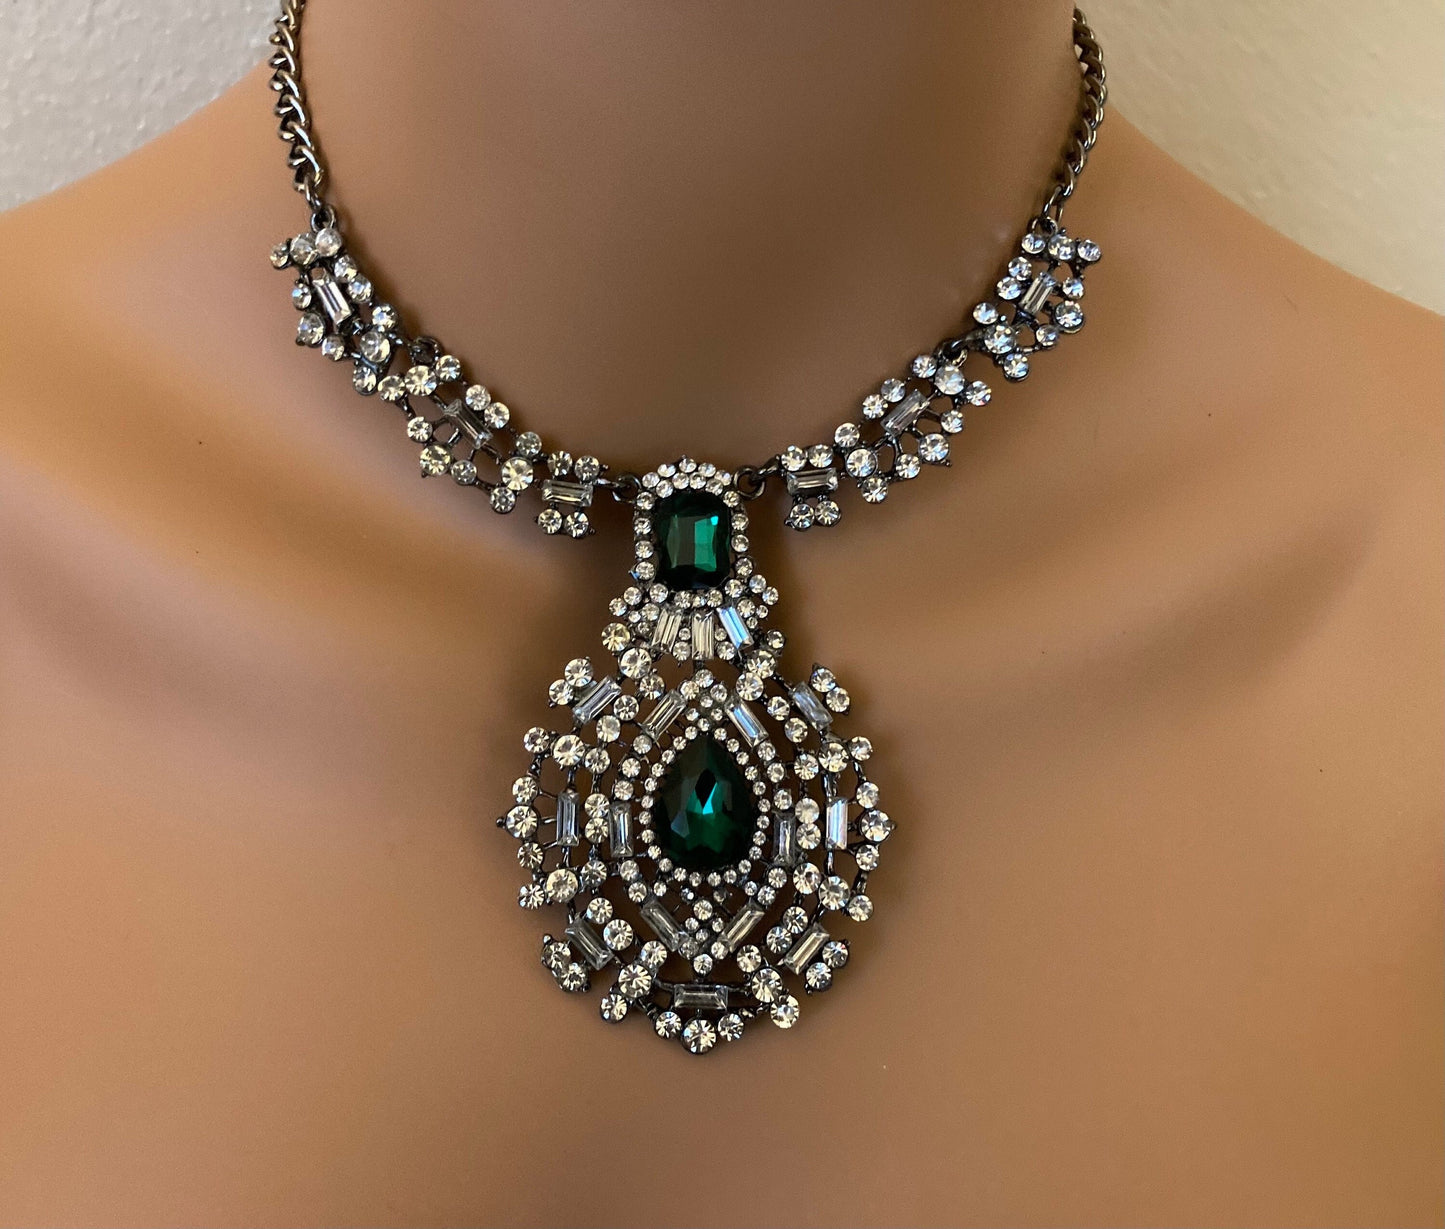 Green  Rhinestone Necklace Statement Necklace Emerald Green Rhinestones adjustable length wedding necklace formal party mother of the bride